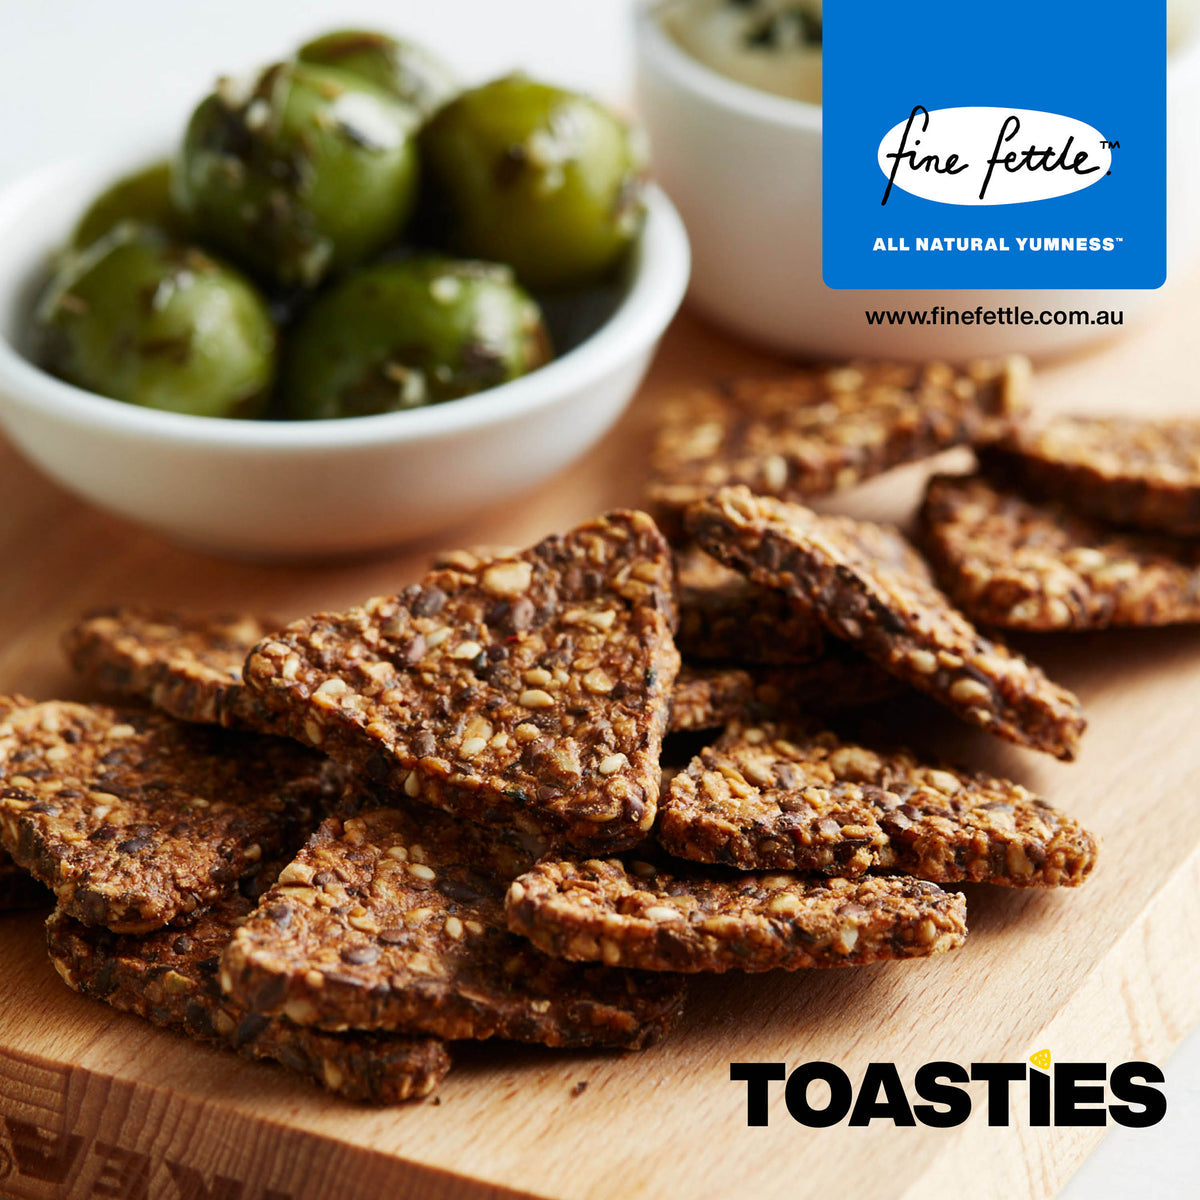 Fine Fettle Toasties Crackers 110g, Chipotle With 6 Wholesome Seeds